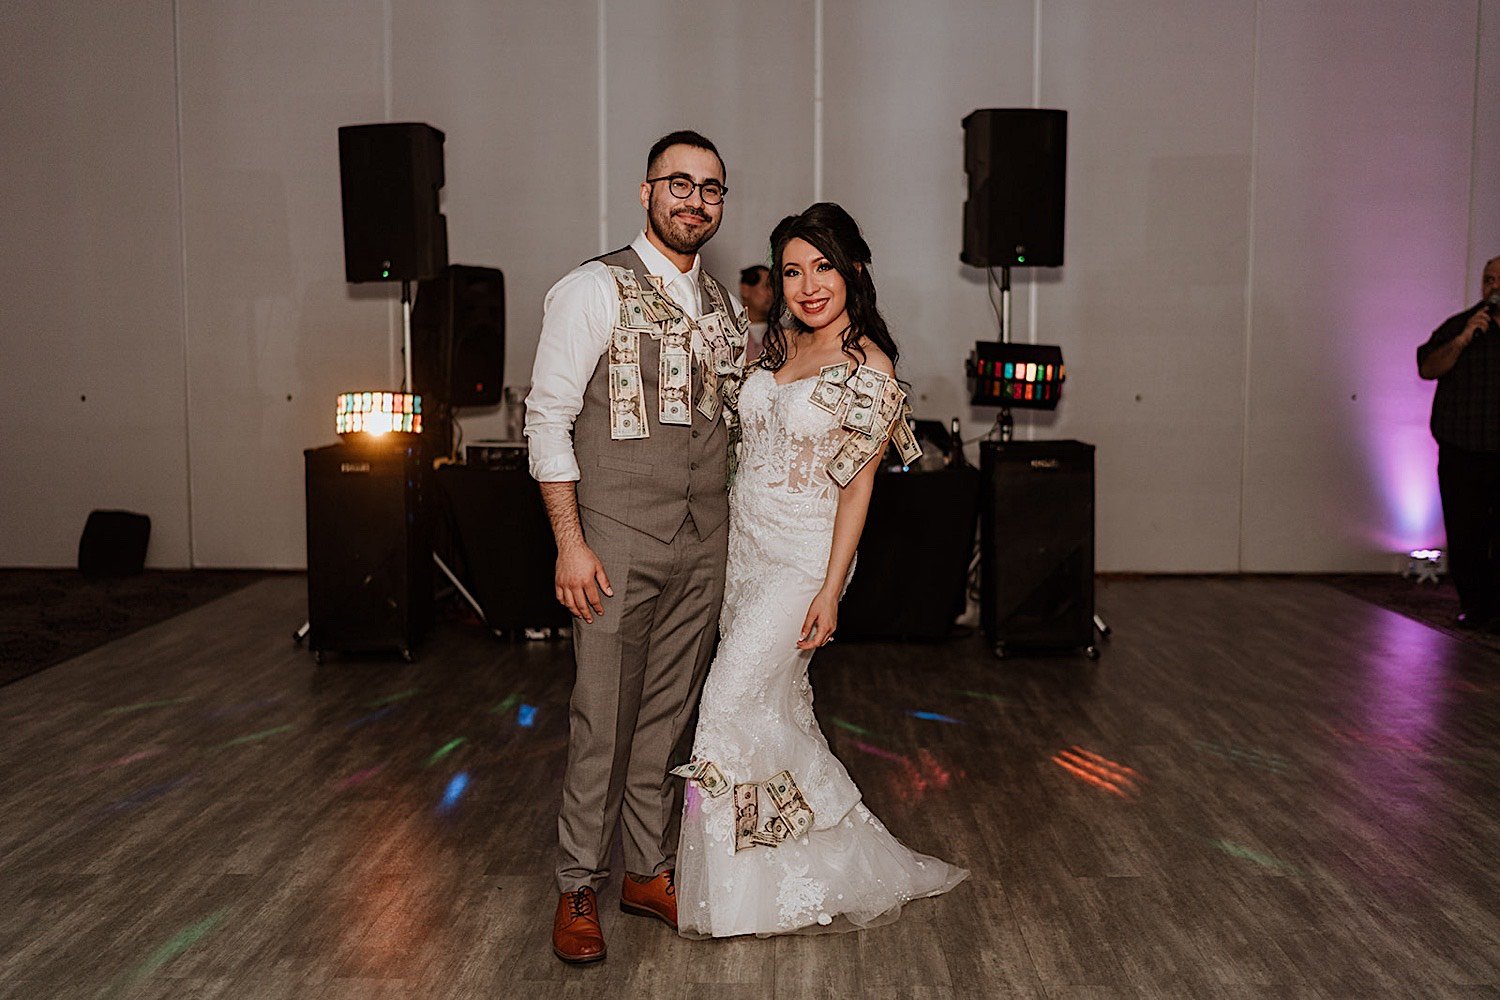 Bride and groom pose on dance floor with money pinned to them in front of DJ